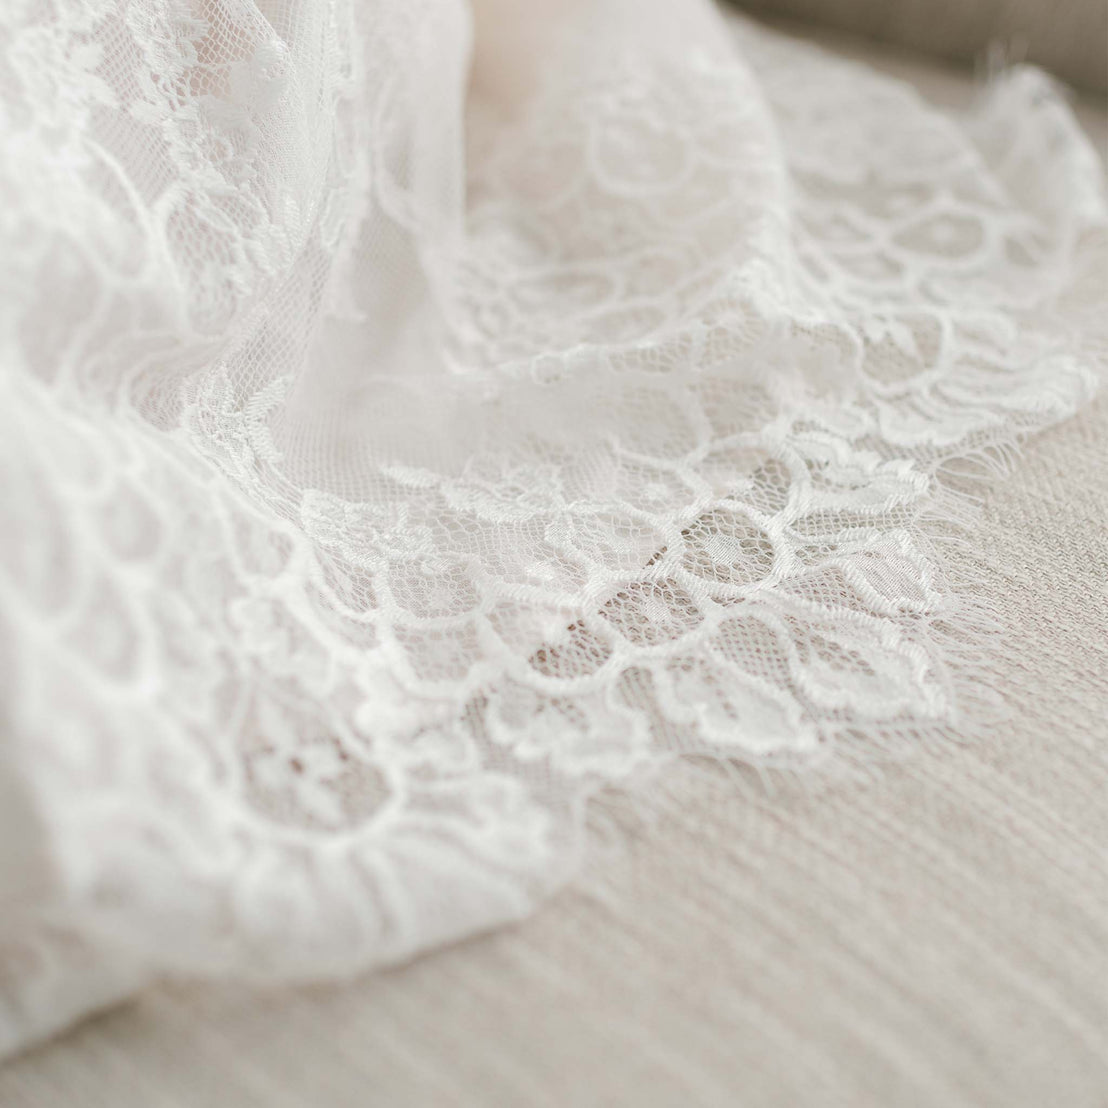 Close-up of delicate Juliette Christening Gown & Bonnet lace fabric with intricate floral patterns, displayed on a soft, vintage, textured surface.